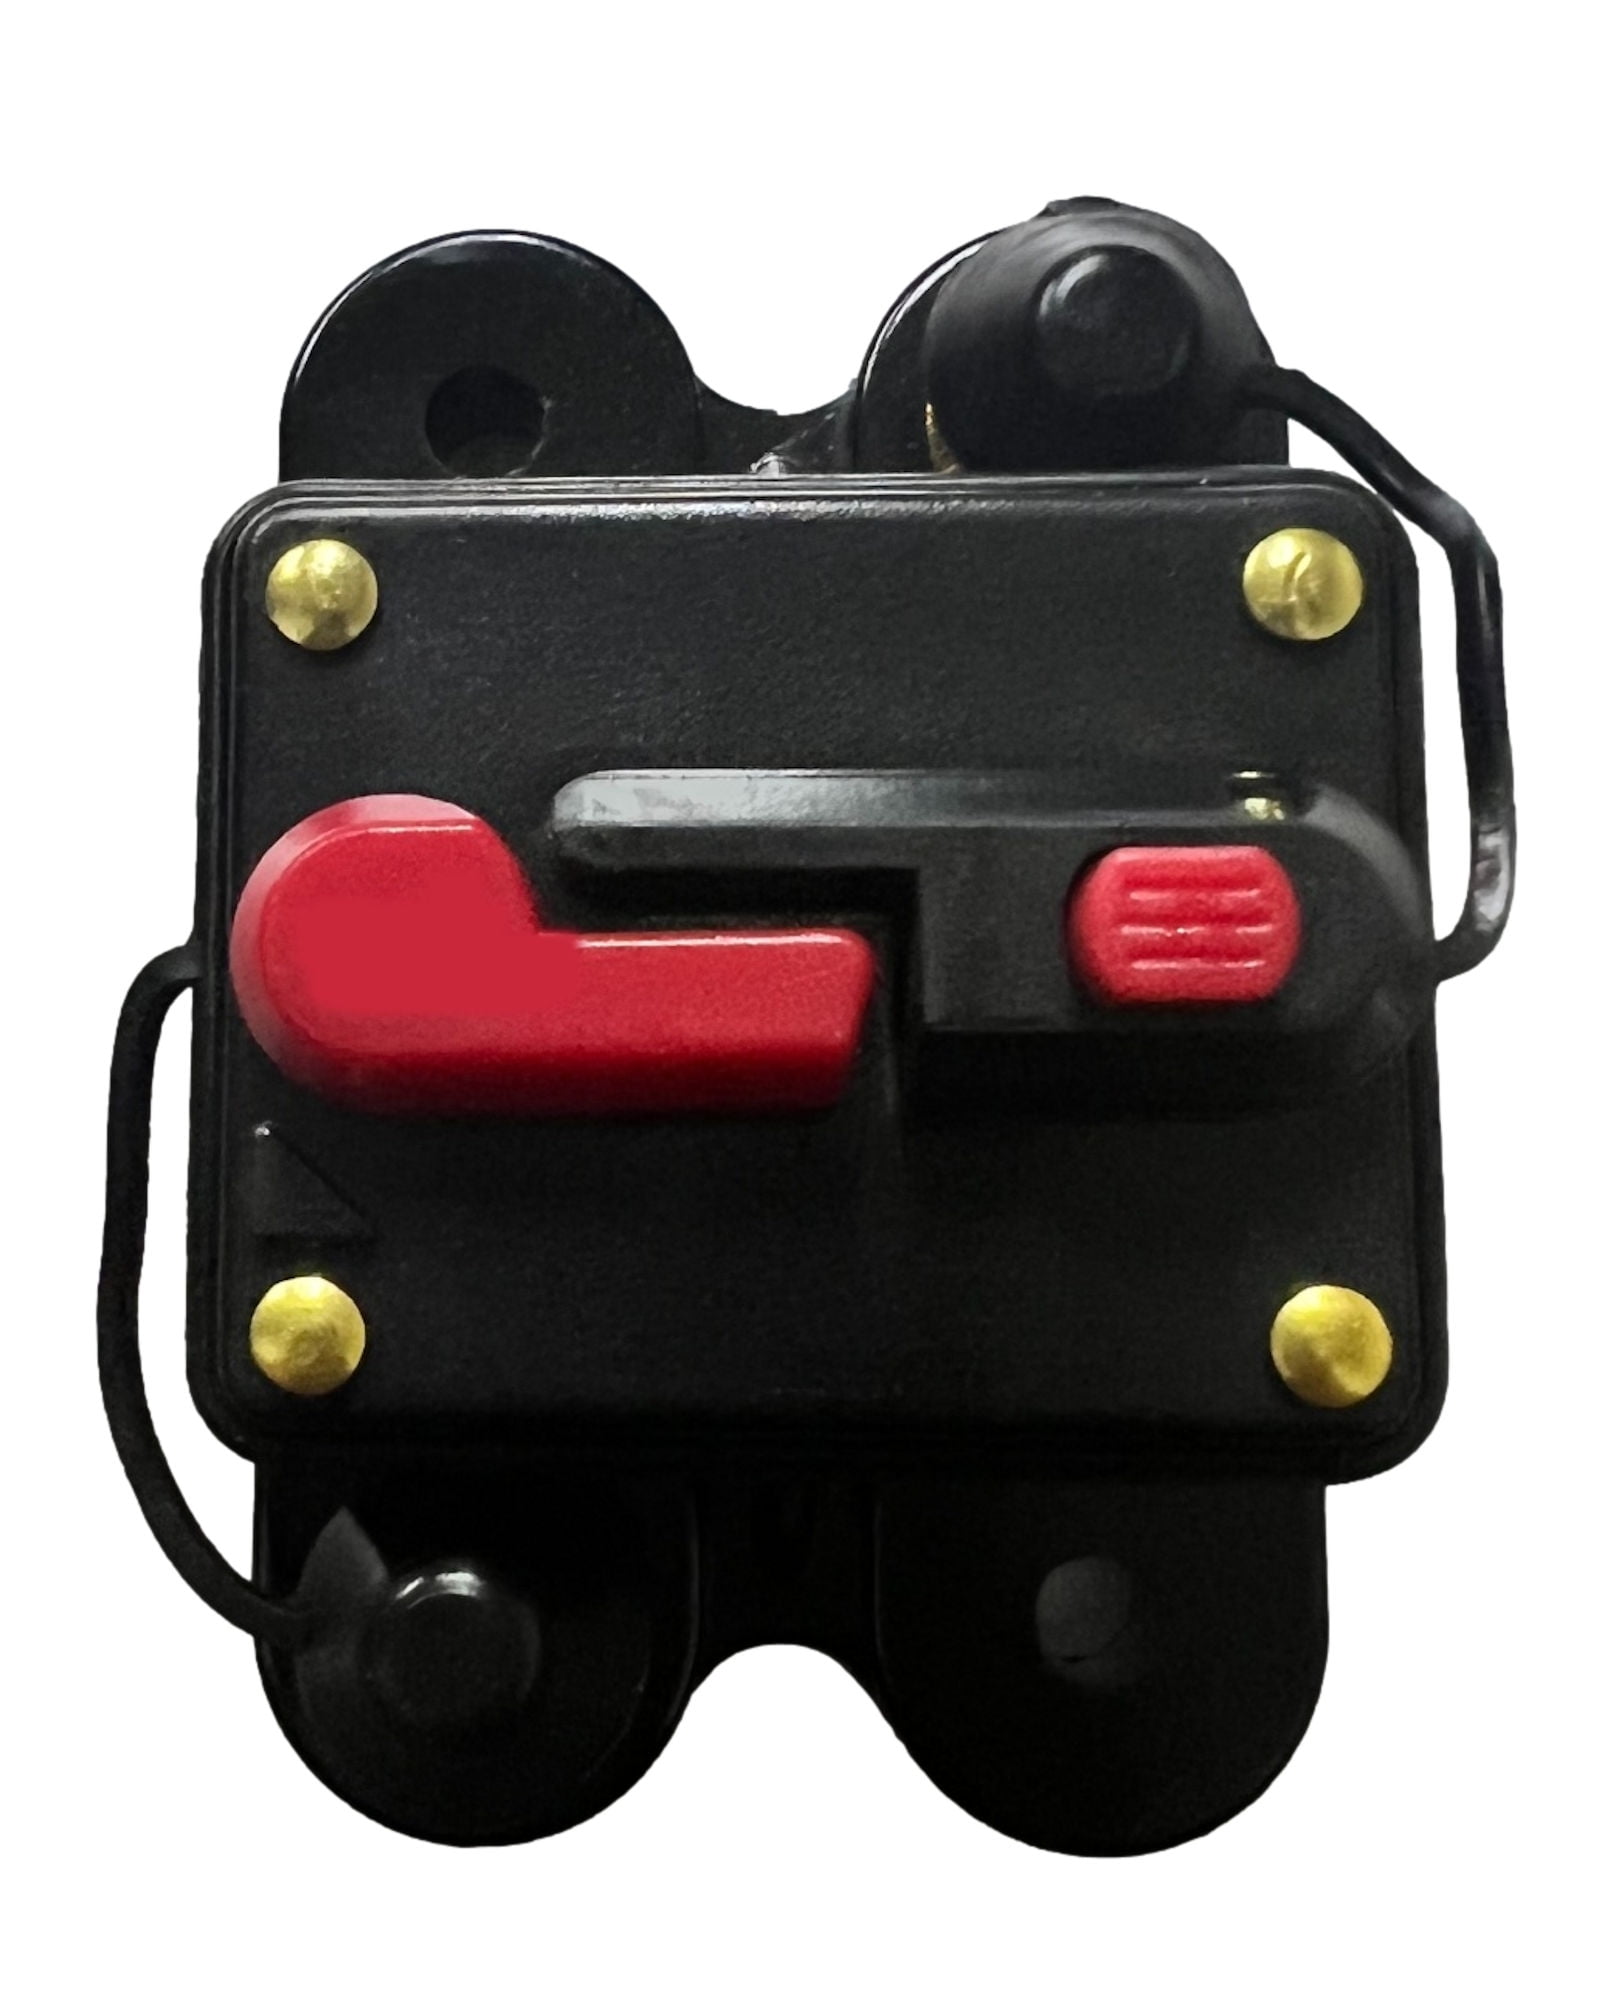 200 AMP 12V DC CIRCUIT BREAKER REPLACE FUSE 200A 12VDC  Comes with Cover 